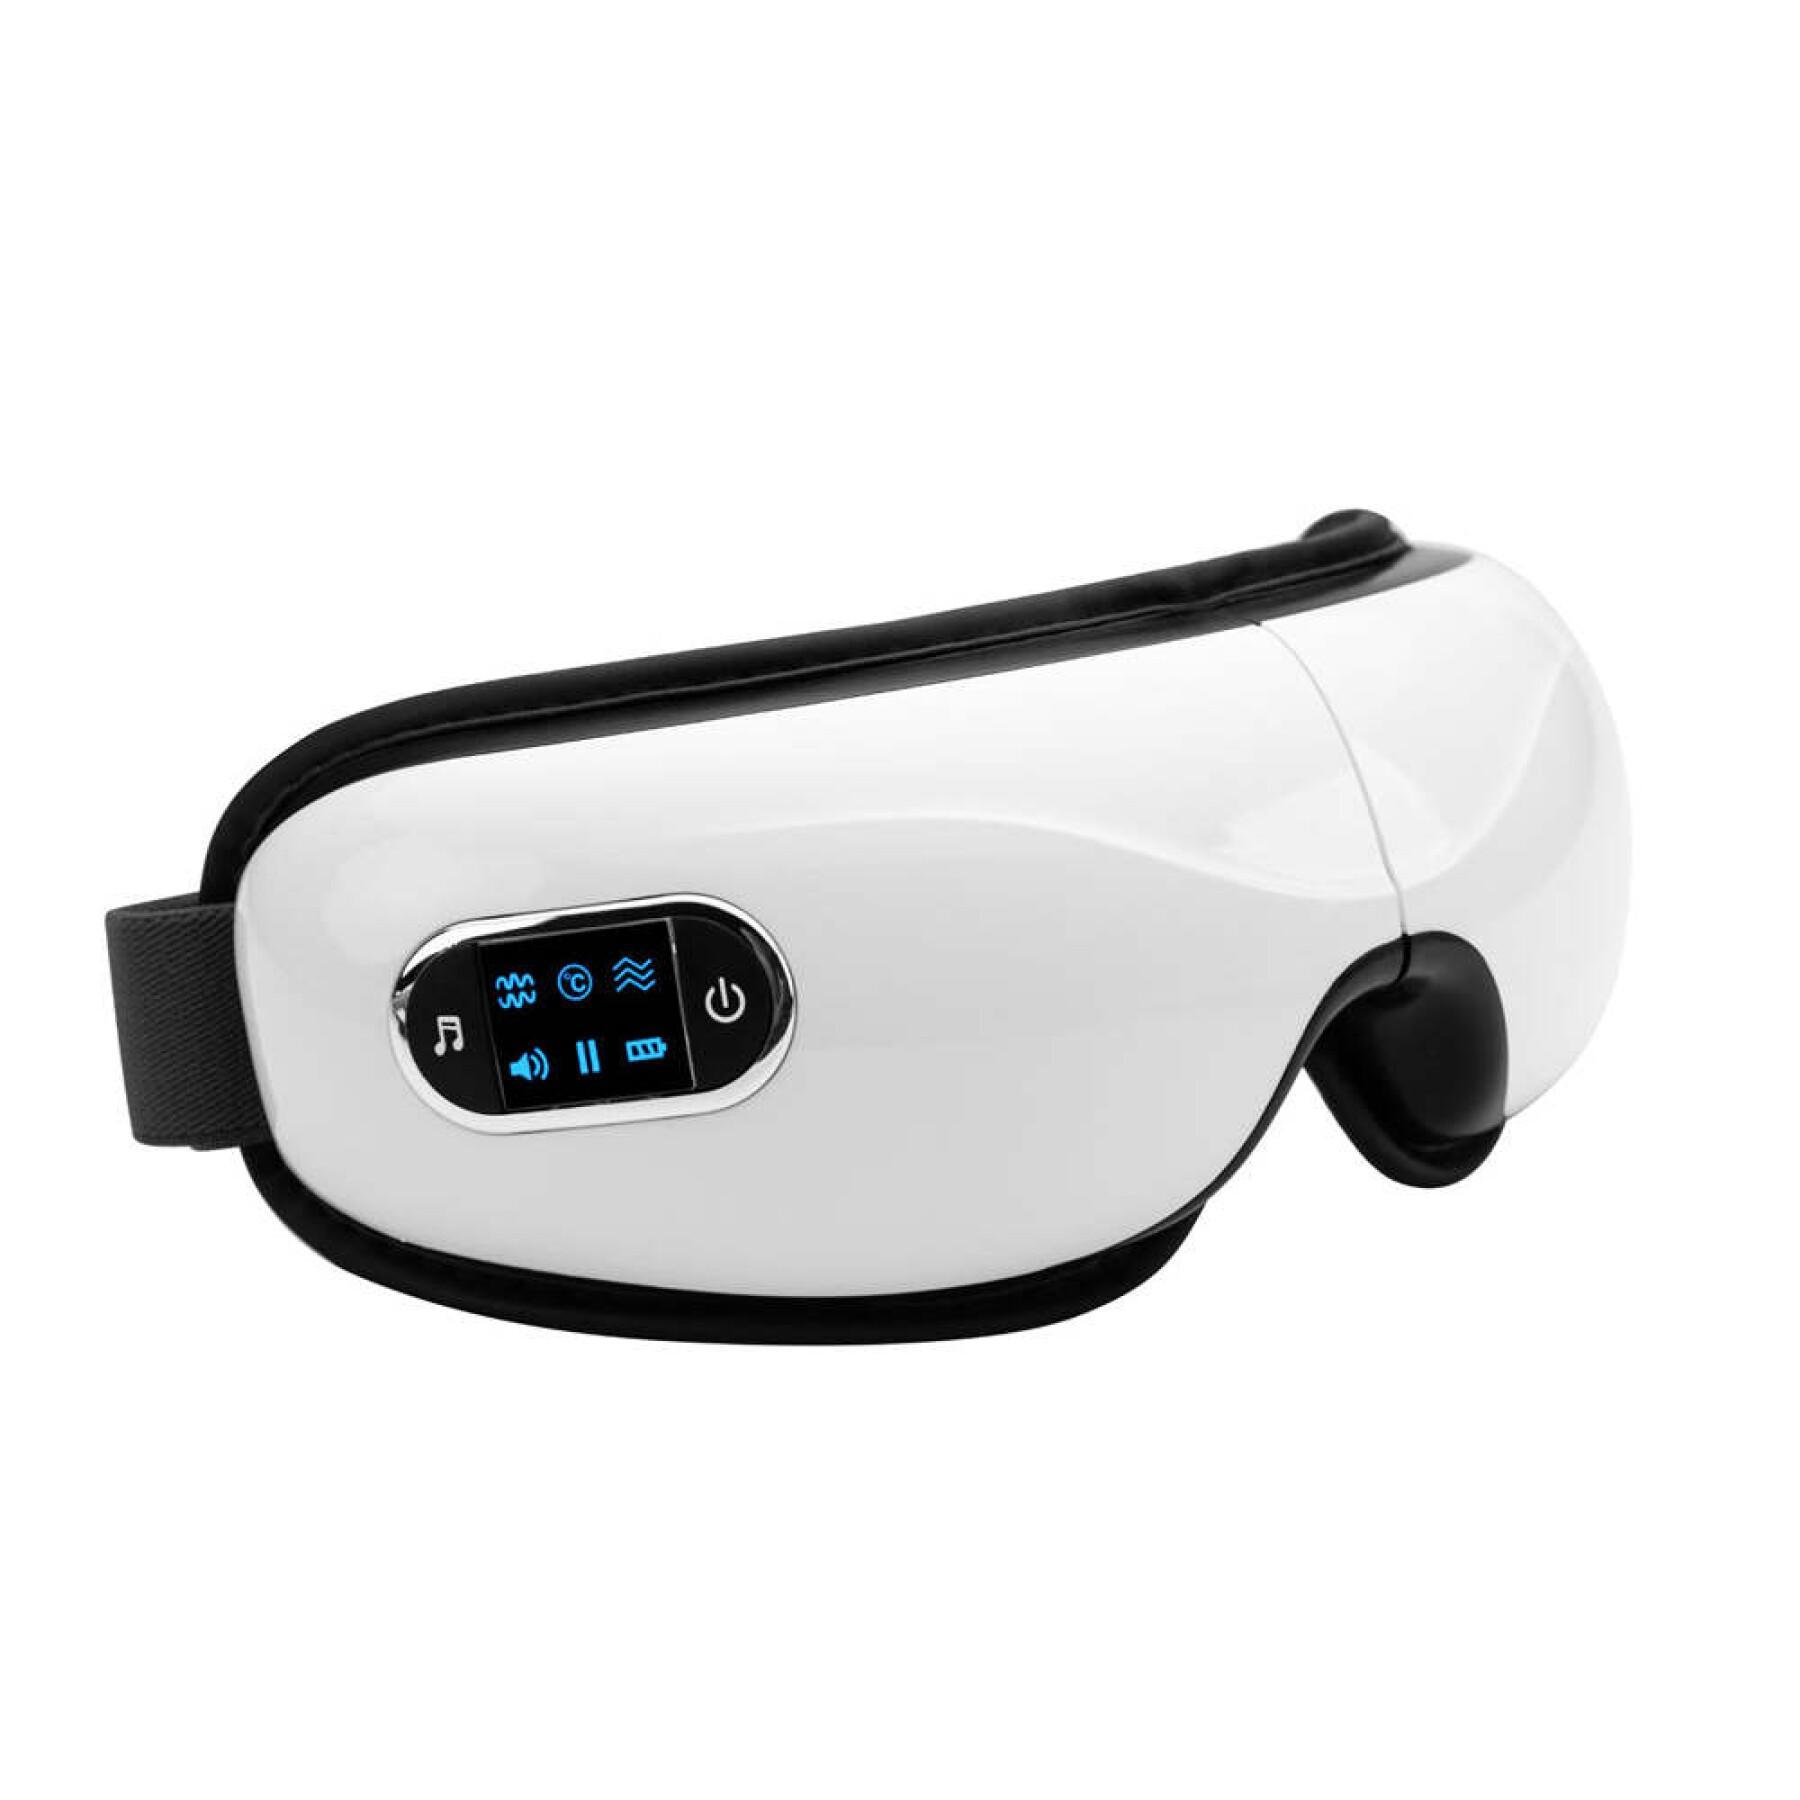 Eye massager with heating function and audio player Synerfit Fitness Dreamea